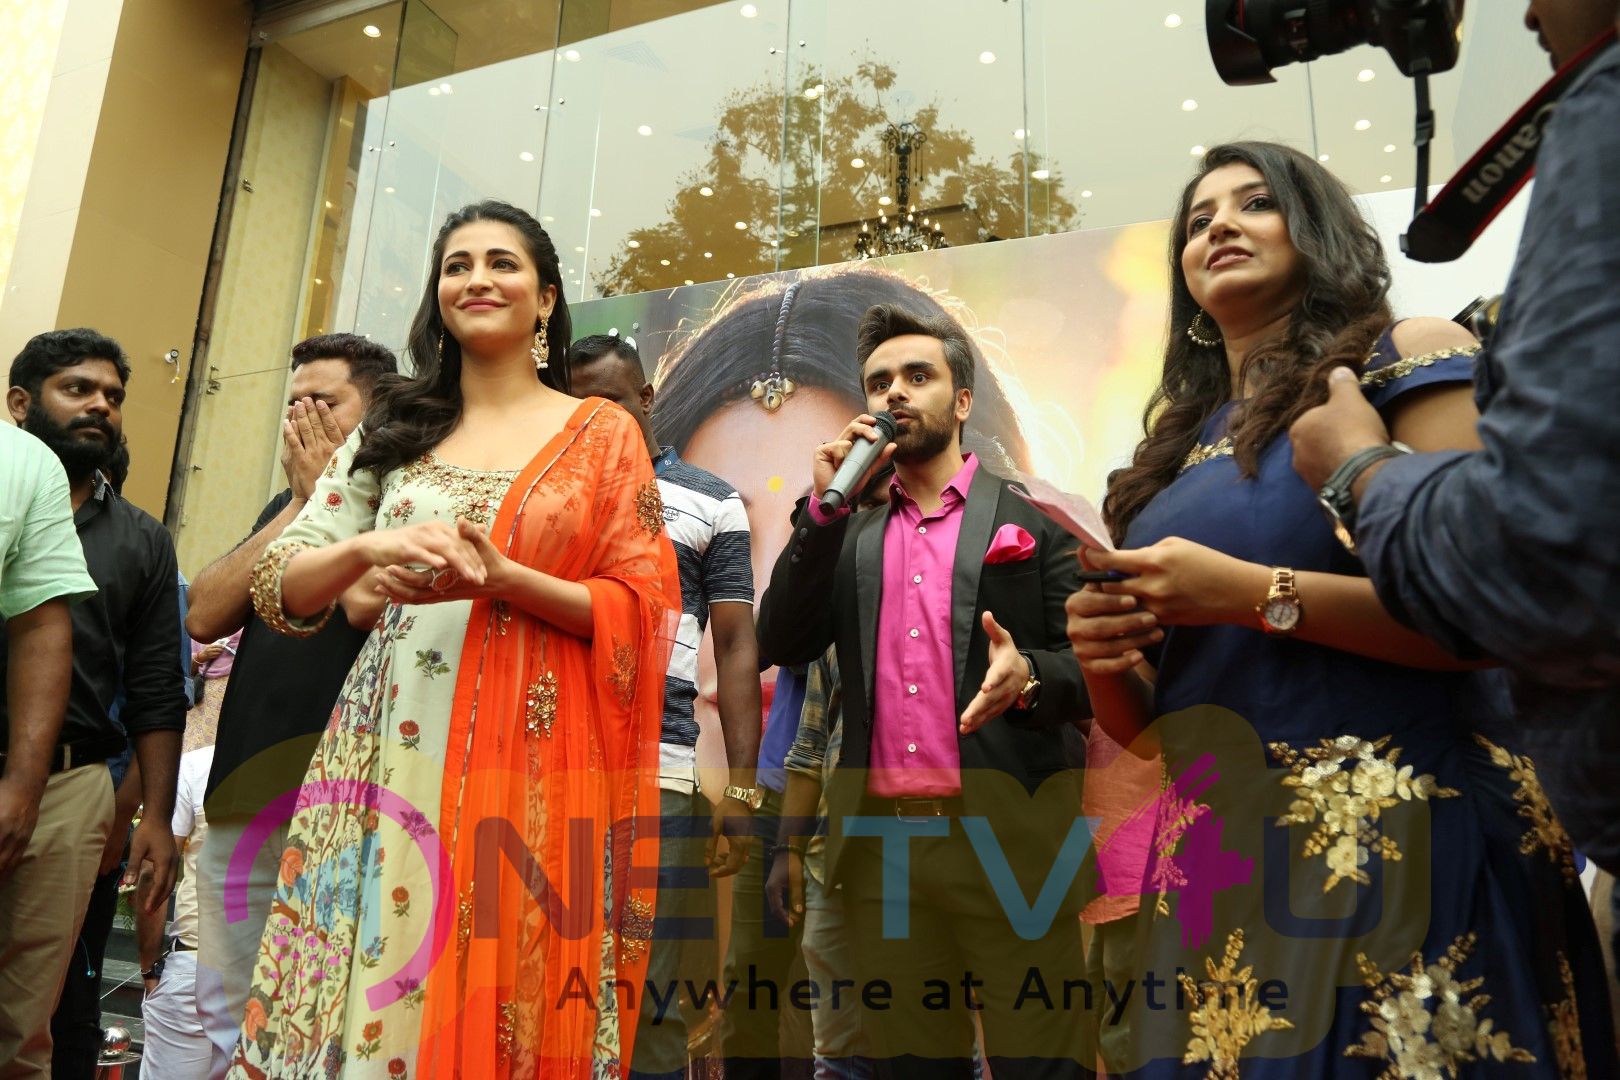 Actress Shruti Haasan Launches Nerru's The First Flagship Family Store In Chennai Stills Tamil Gallery